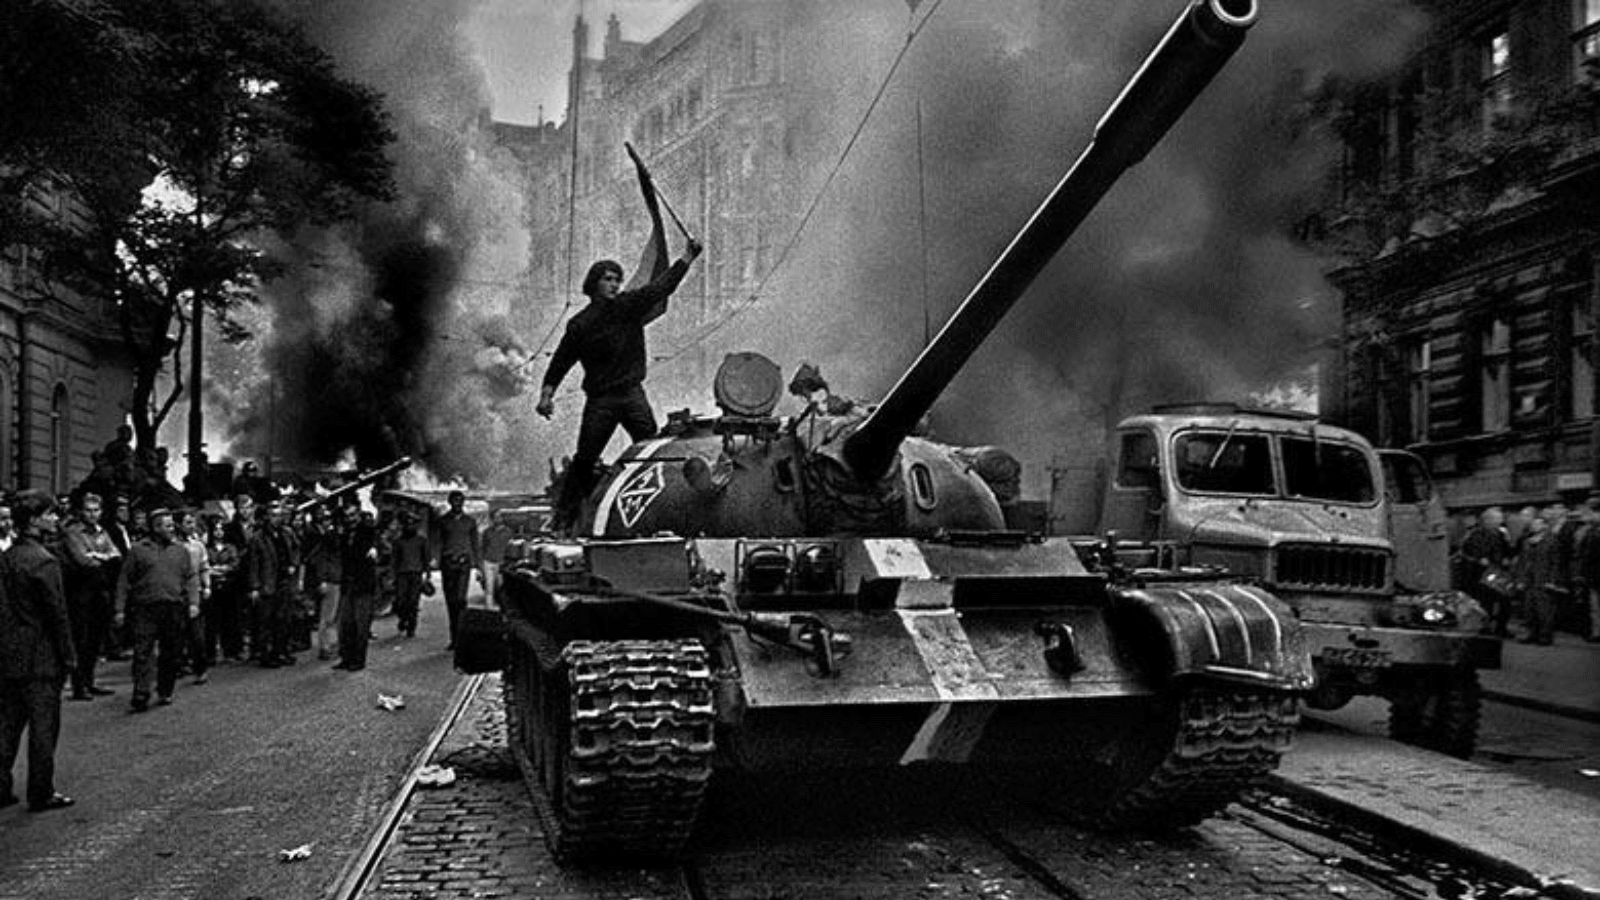 Today is another anniversary of the Soviet invasion of Czechoslovakia